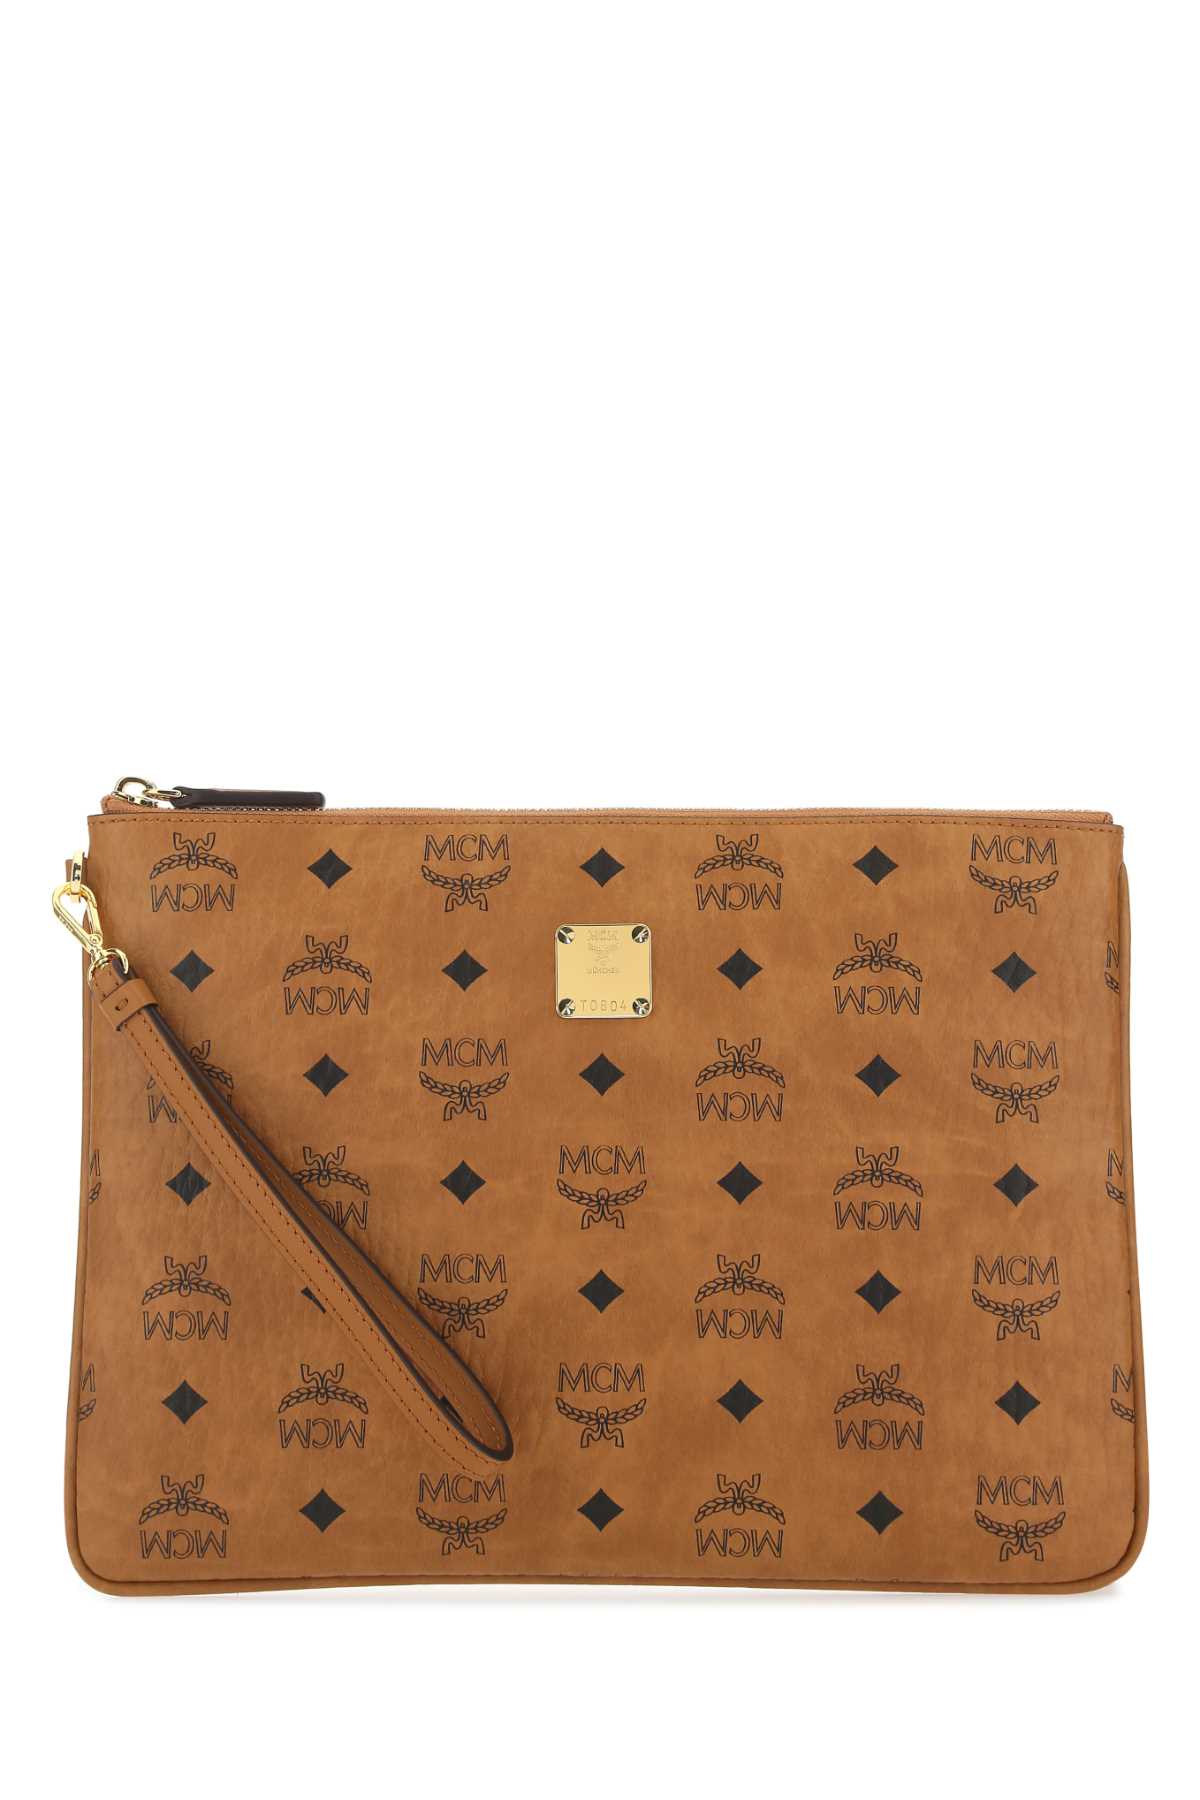 Mcm Printed Canvas Clutch In Co